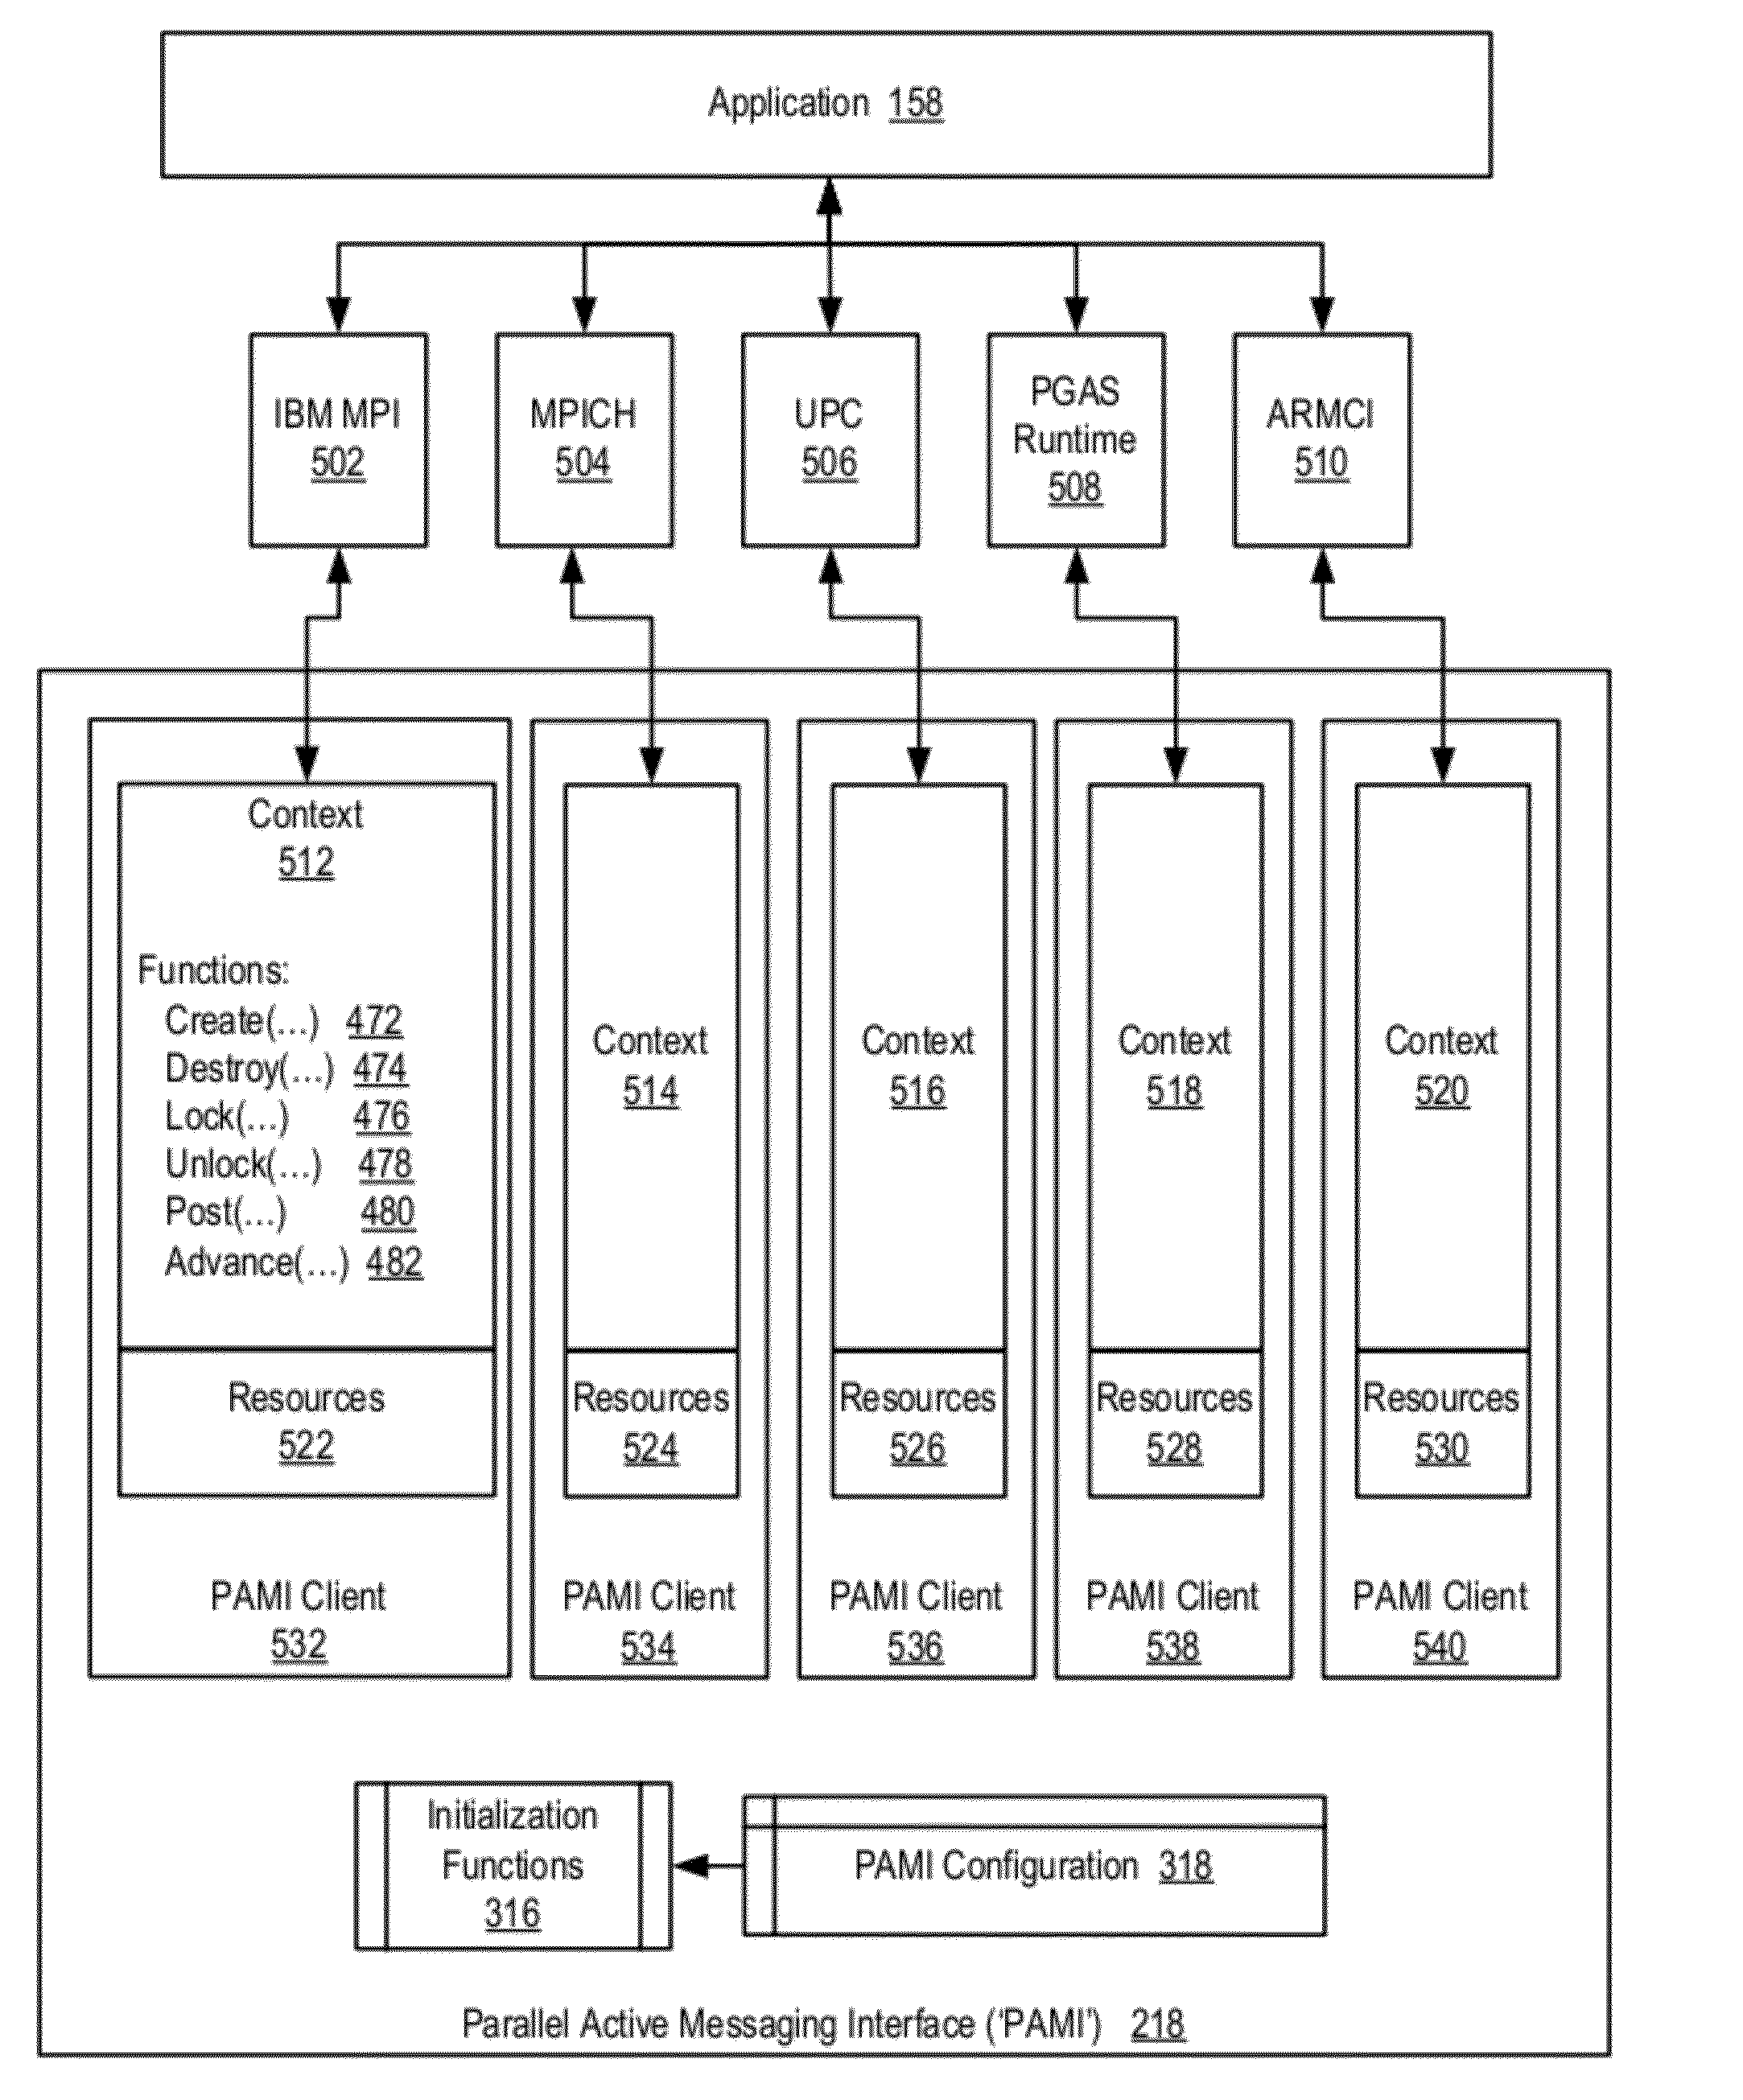 Processing Data Communications Events In A Parallel Active Messaging Interface Of A Parallel Computer